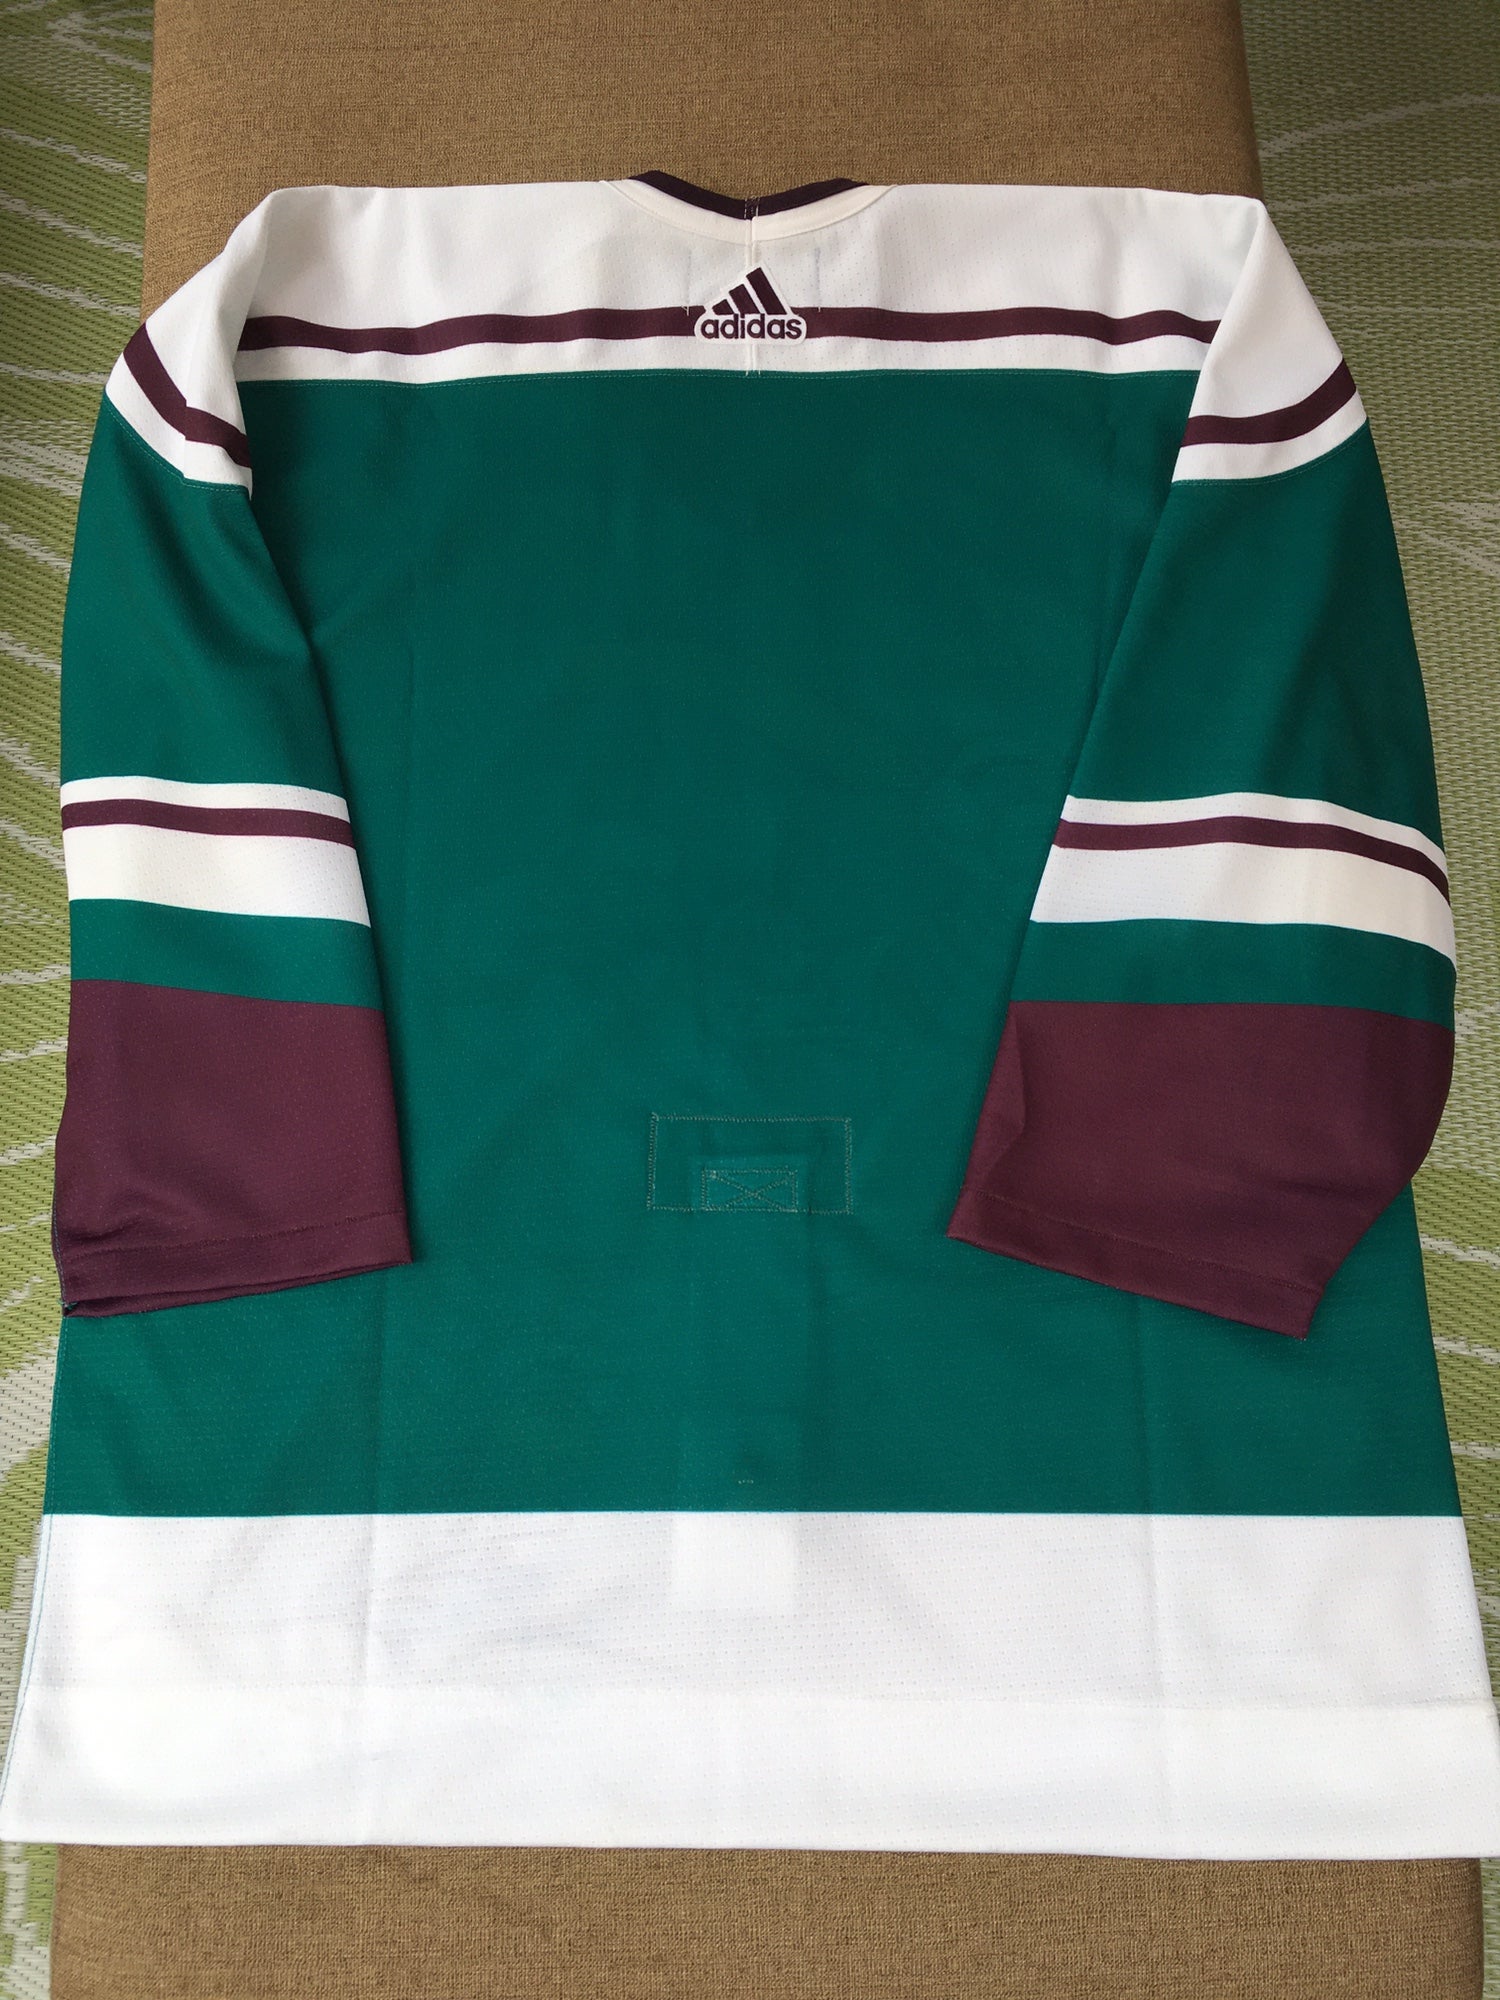 If anyone is looking to get an Adidas D5 jersey : r/AnaheimDucks